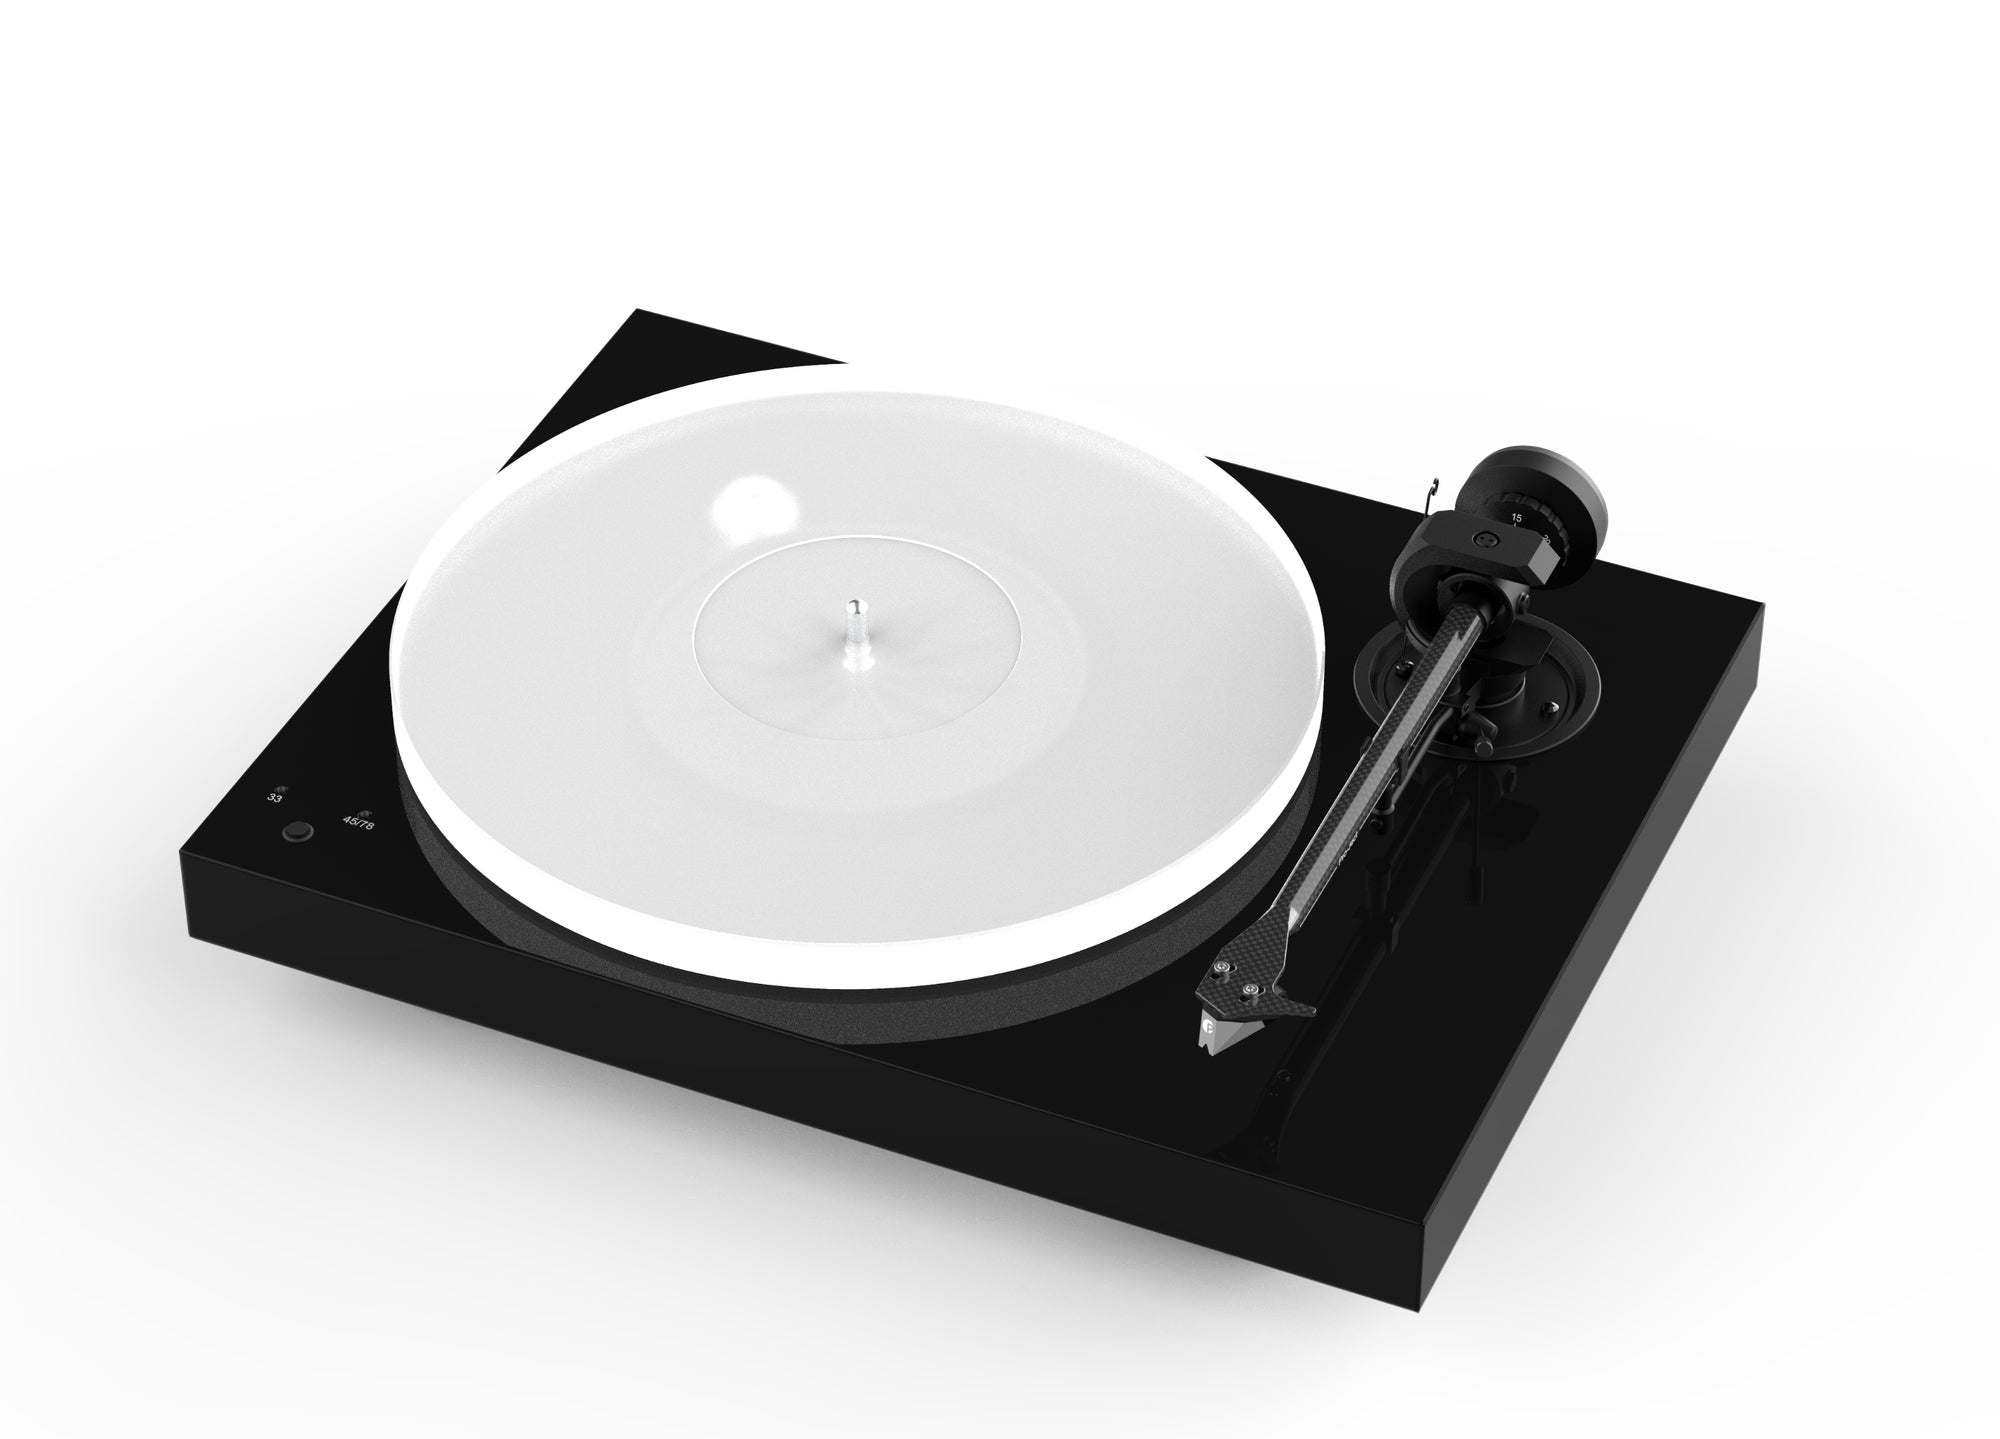 PRO-JECT X1 B TURNTABLE WITH ORTOFON 2M RED CARTRIDGE PRE-FITTED